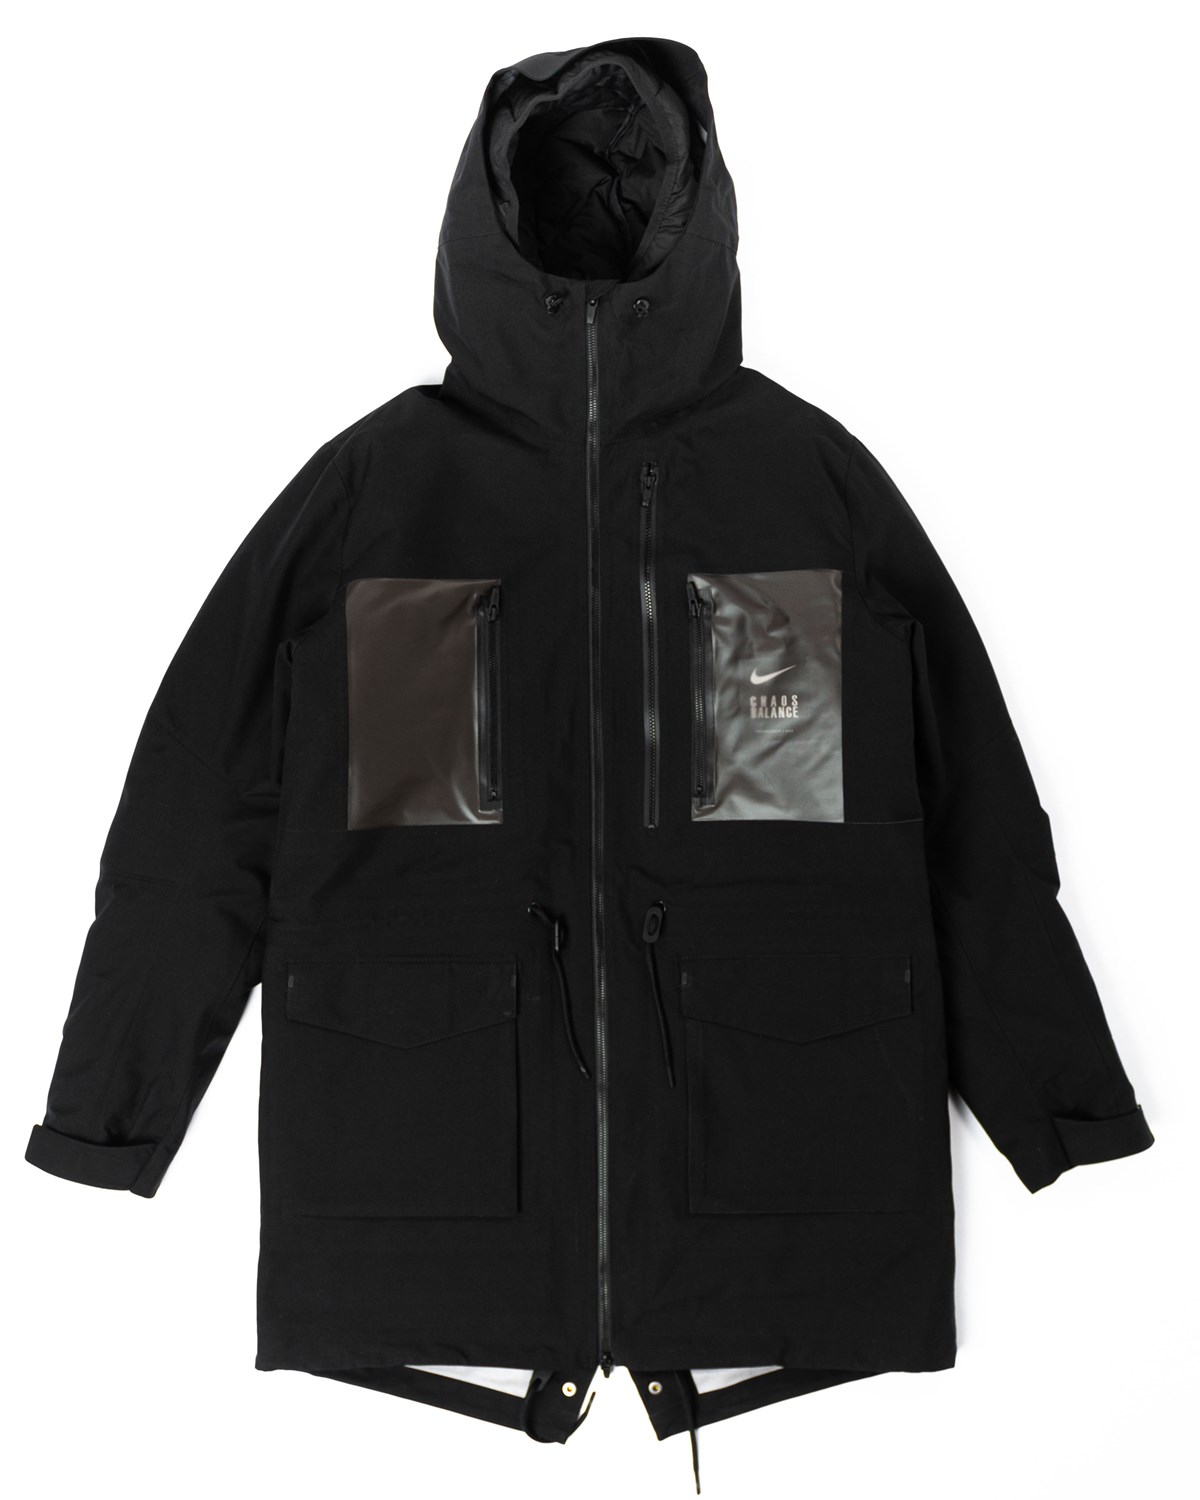 NRG Undercover Parka Fish Tail Nike Outerwear Jackets Black